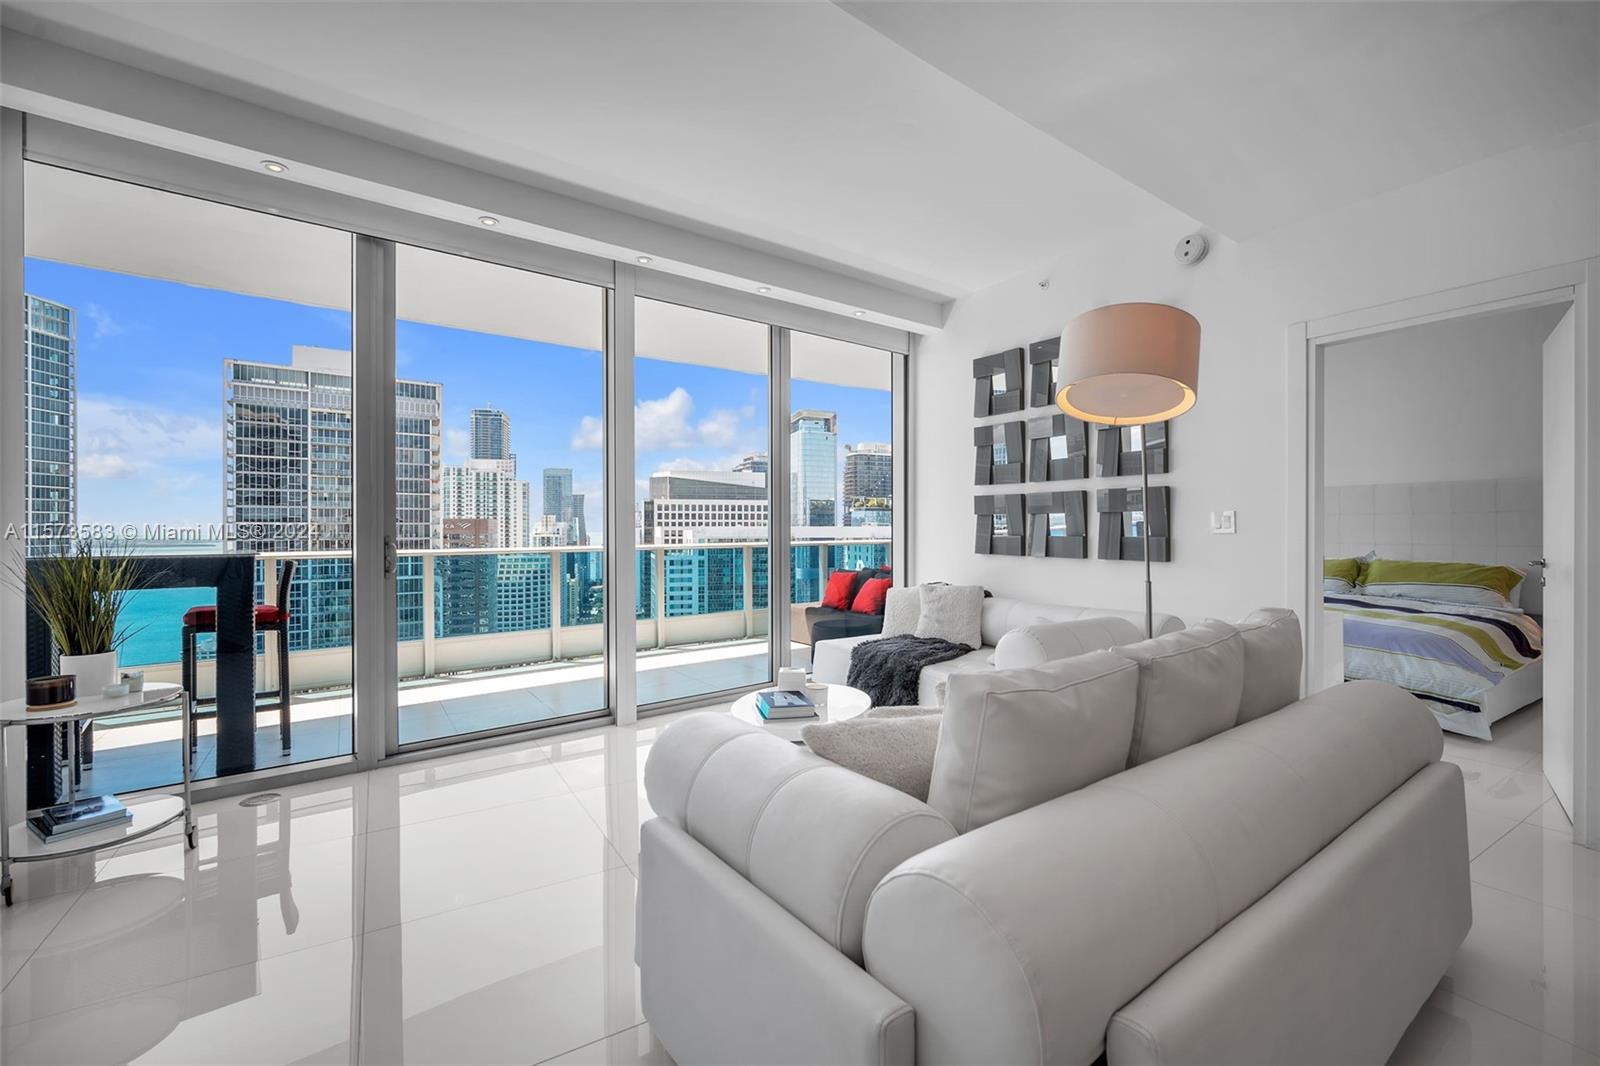 Immerse yourself in luxury in this stunning 2-bed, 2.5-bath home at the incomparable Epic Miami. Floor-to-ceiling windows flood every room with sunlight, revealing 180-degree waterfront & cityscape views. The chef’s kitchen boasts a Subzero fridge, Miele oven, dishwasher, & cooktop.  Includes stylish furniture, large storage on the same floor ($97k value) & a second storage near your private parking space - both under AC. Enjoy amenities like room service, a state-of-the-art gym, full-service Privai Spa, 3 private residents’ & 2 hotel-shared pools with poolside bar and restaurant service. Acclaimed dining venues Zuma & Area 31 on property. Ideal for walkability to Whole Foods, fine dining, and upscale shopping. The Epic Condo embodies the pinnacle of luxury real estate in Miami.